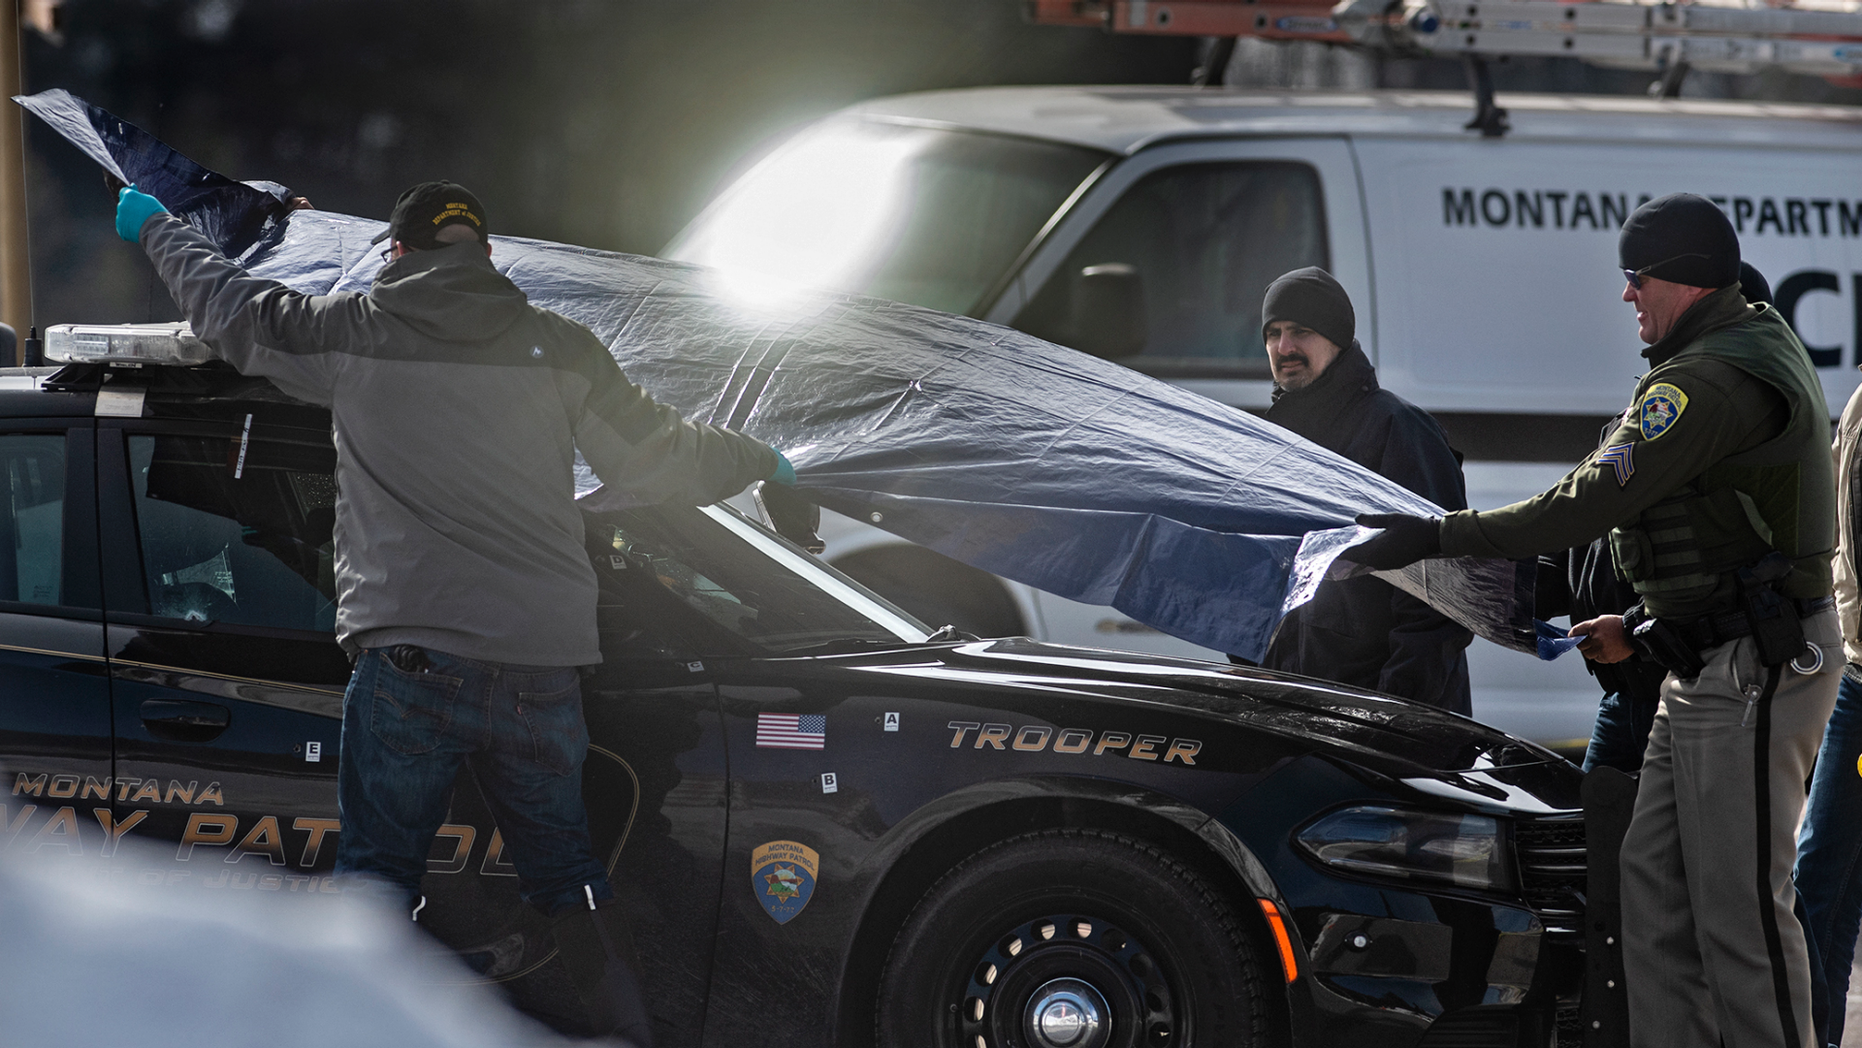 Police forces cover the car of Montana State Wade Palmer on the scene of the shooting near Evaro Bar on Friday, March 15, 2019, in Missoula, Mt. Palmer, who was investigating a previous shooting, was himself shot and wounded last Friday after he discovered the suspect's vehicle, prompting authorities to launch a manhunt that would have resulted in the shooting. arrest of a 29-year-old man, officials said. (Tommy Martino / The Missoulian via AP)